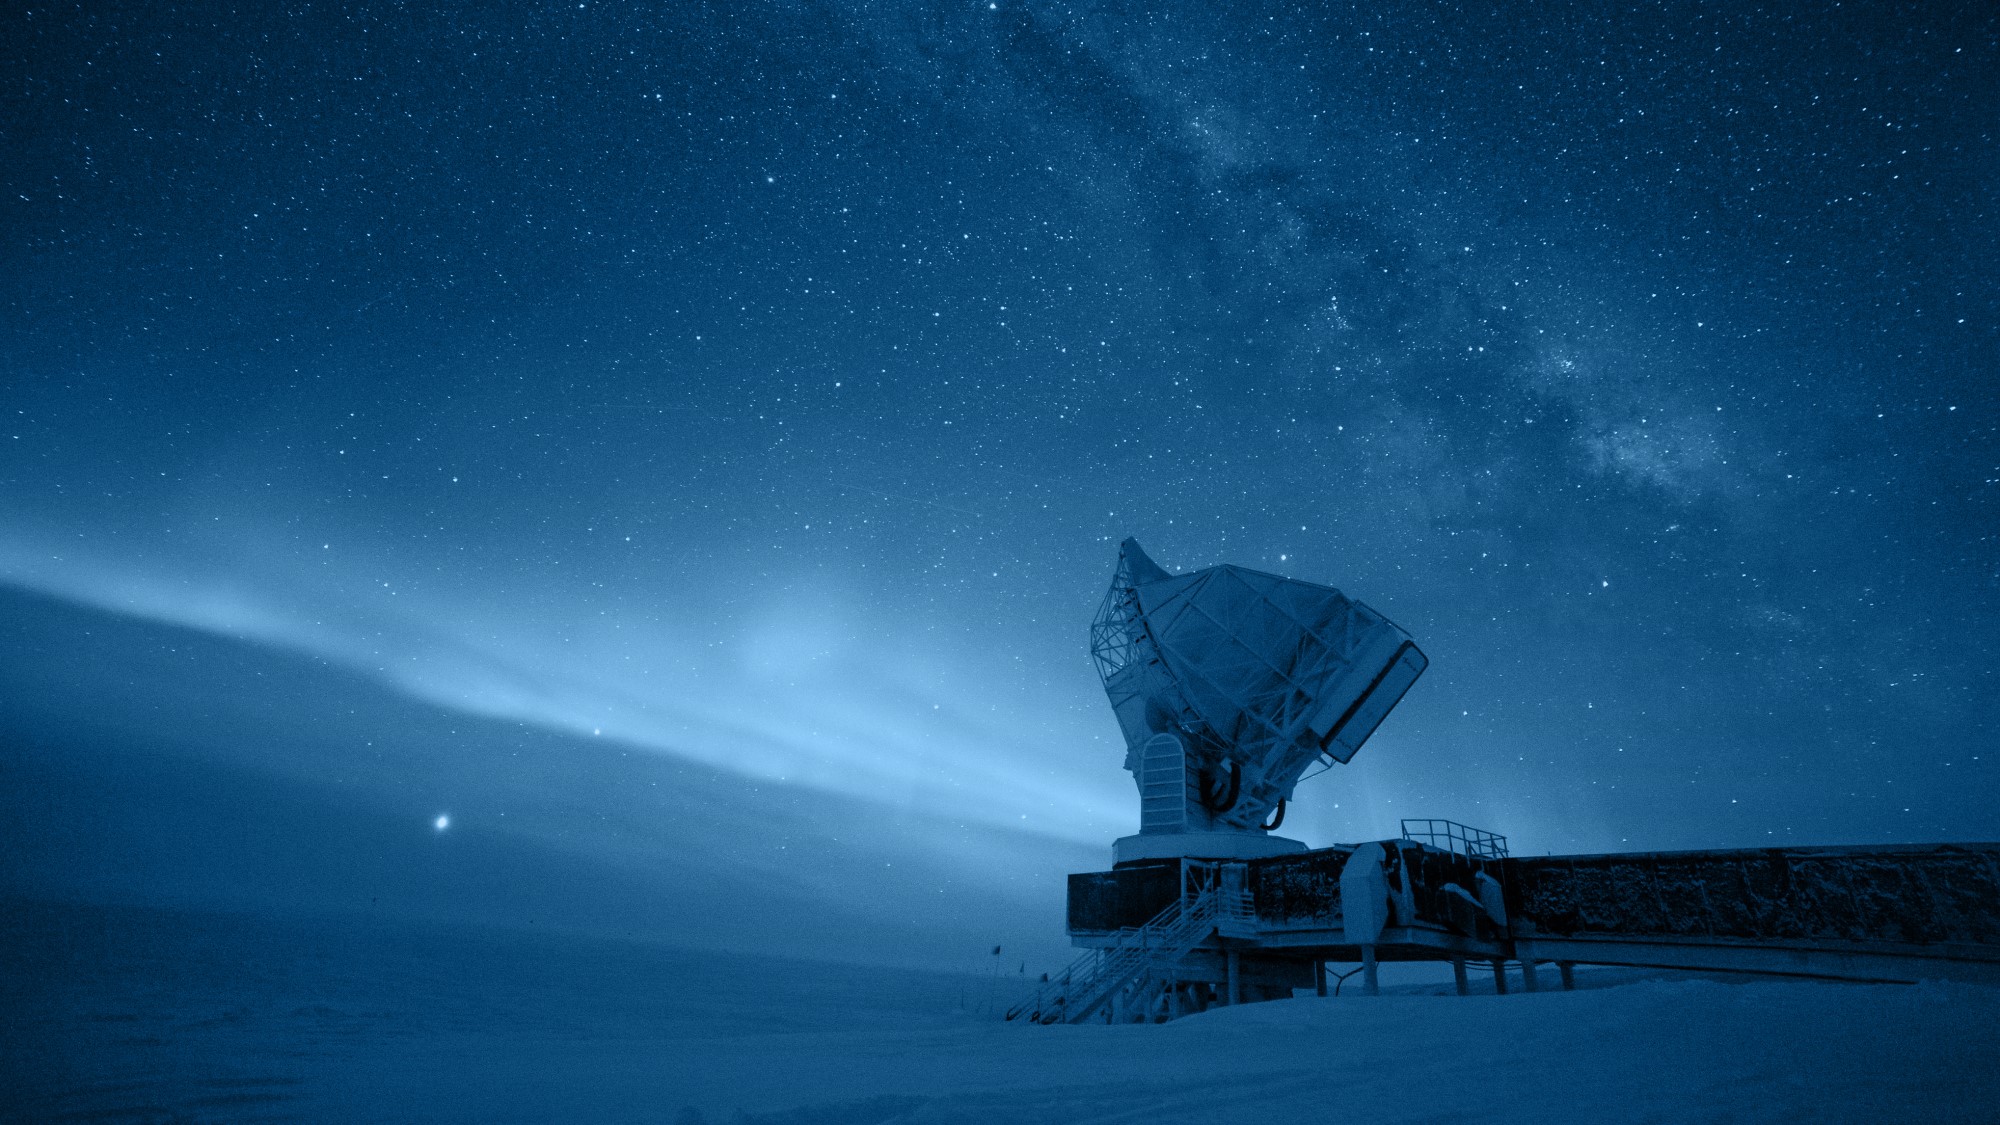 The South Pole Telescope at National Science Foundation's Amundsen–Scott South Pole Station in Antarctica, which is part of the Event Horizon Telescope array.